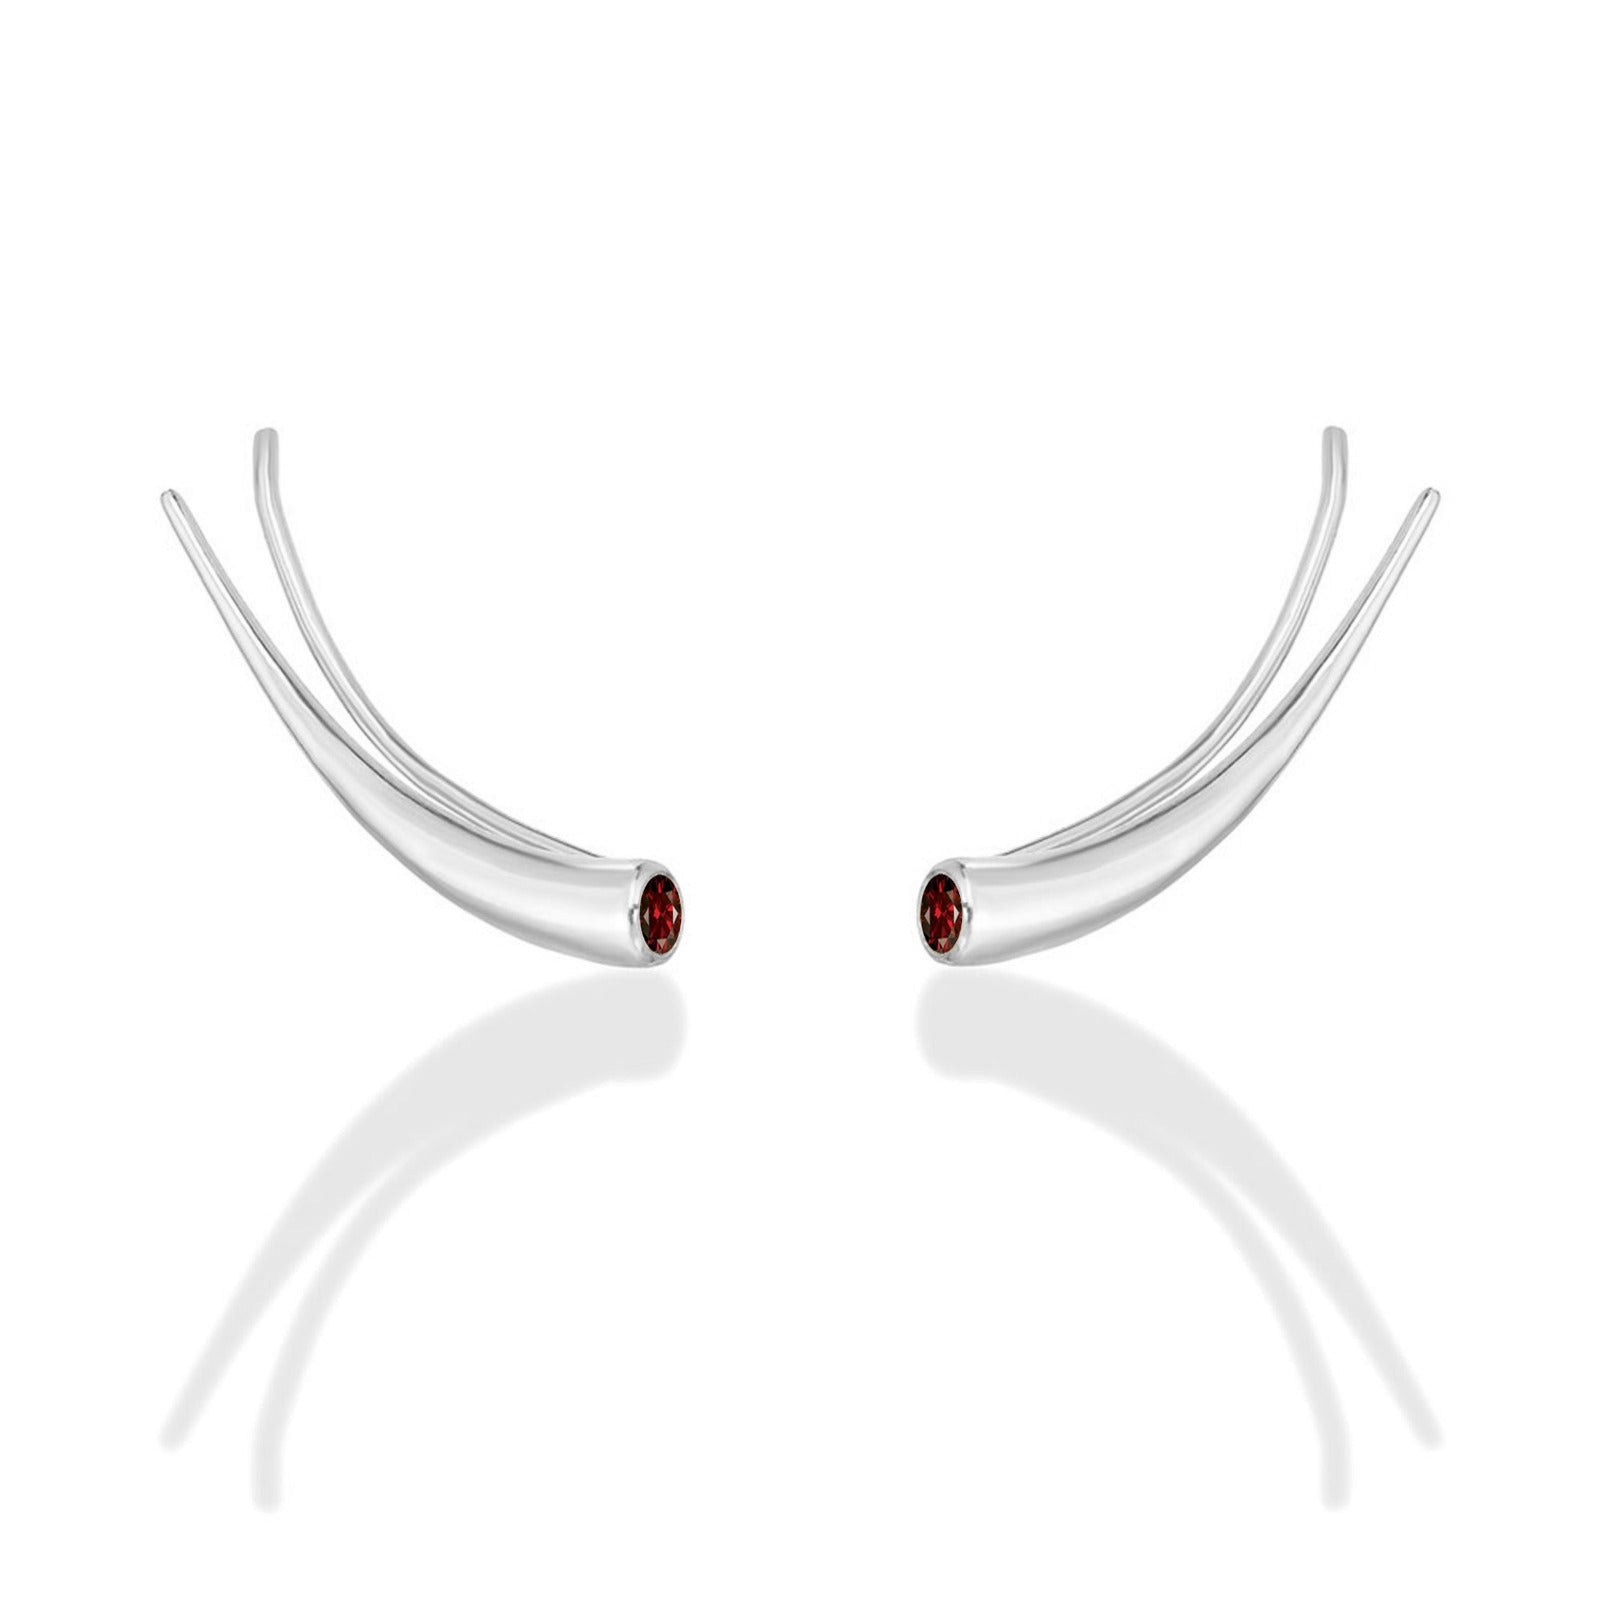 14k white gold Curved Quill Climber Earrings with garnet